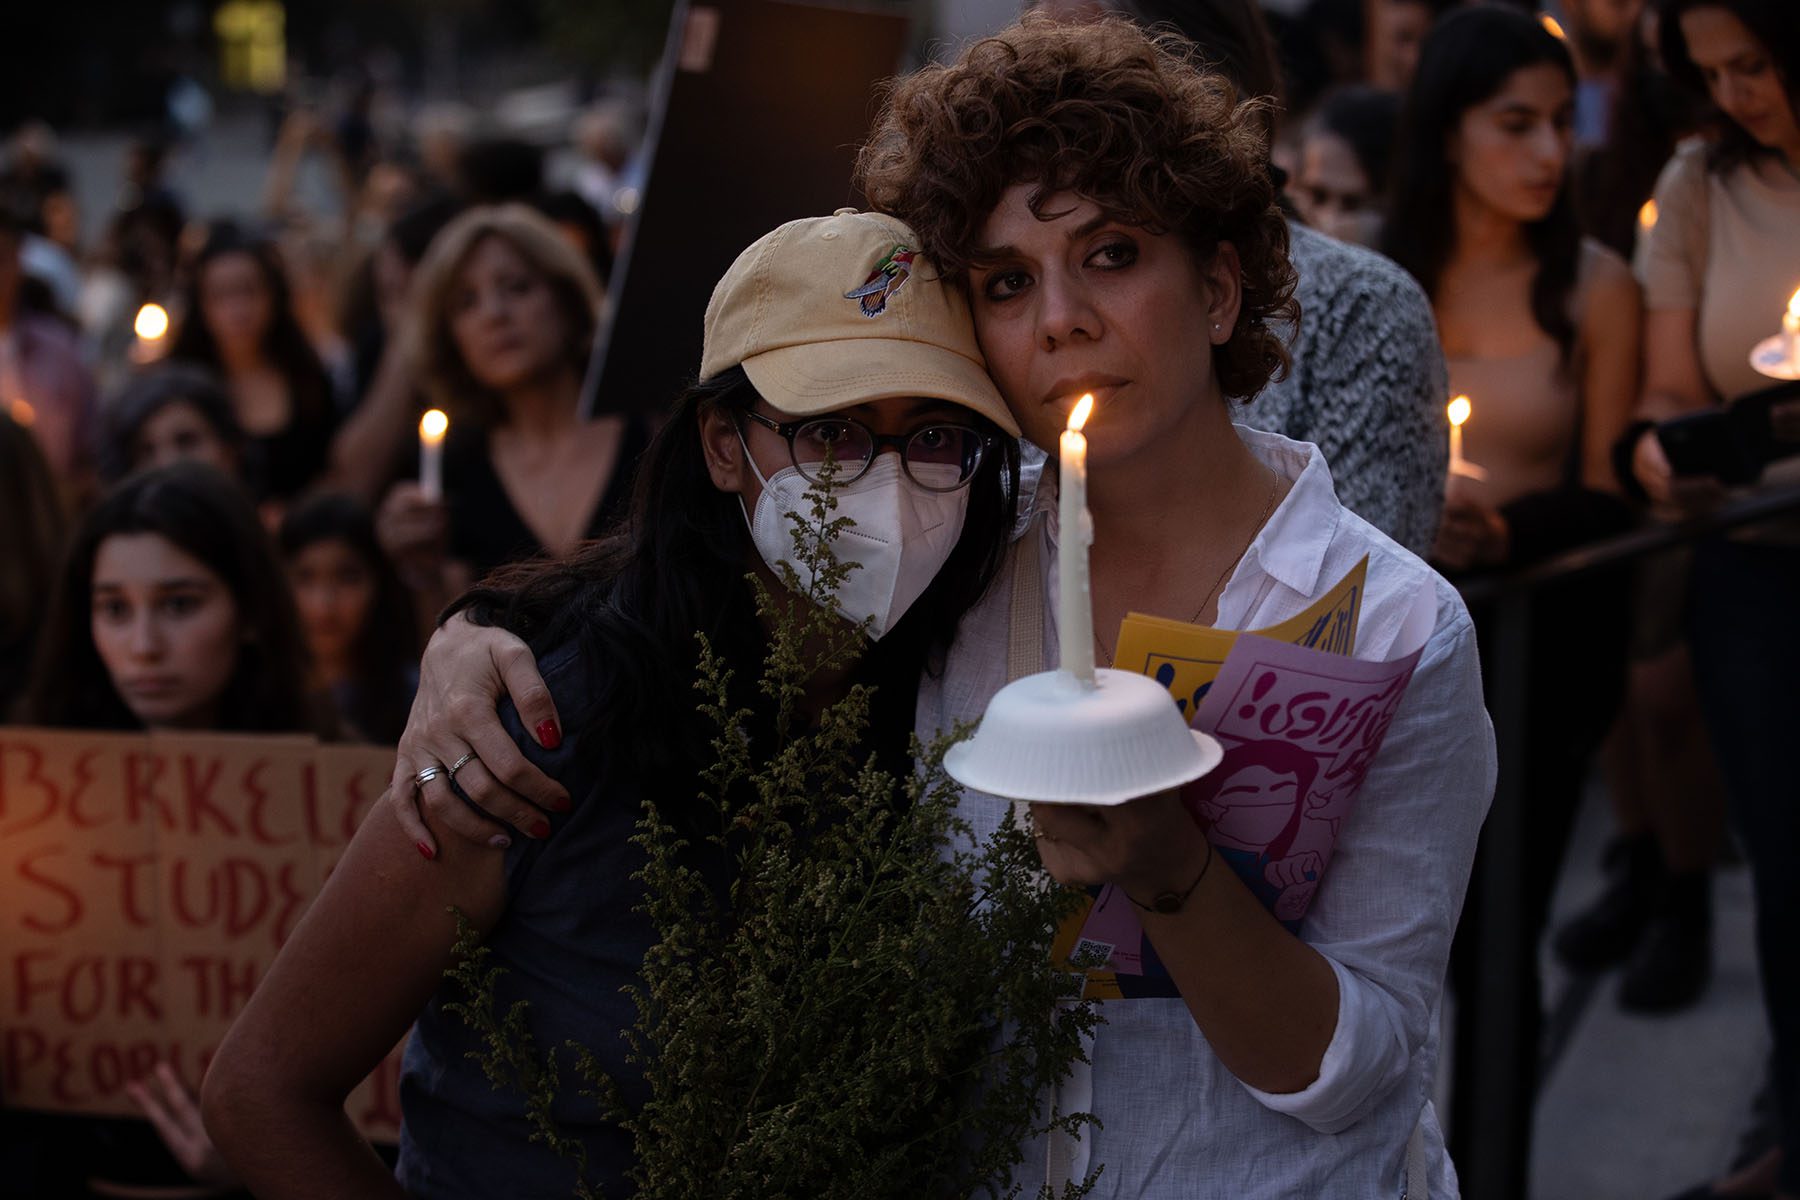 A young woman holds a bouquet and hugs an older woman holding a candle at a candlelit vigil. Behind them, a large crowd can be seen.